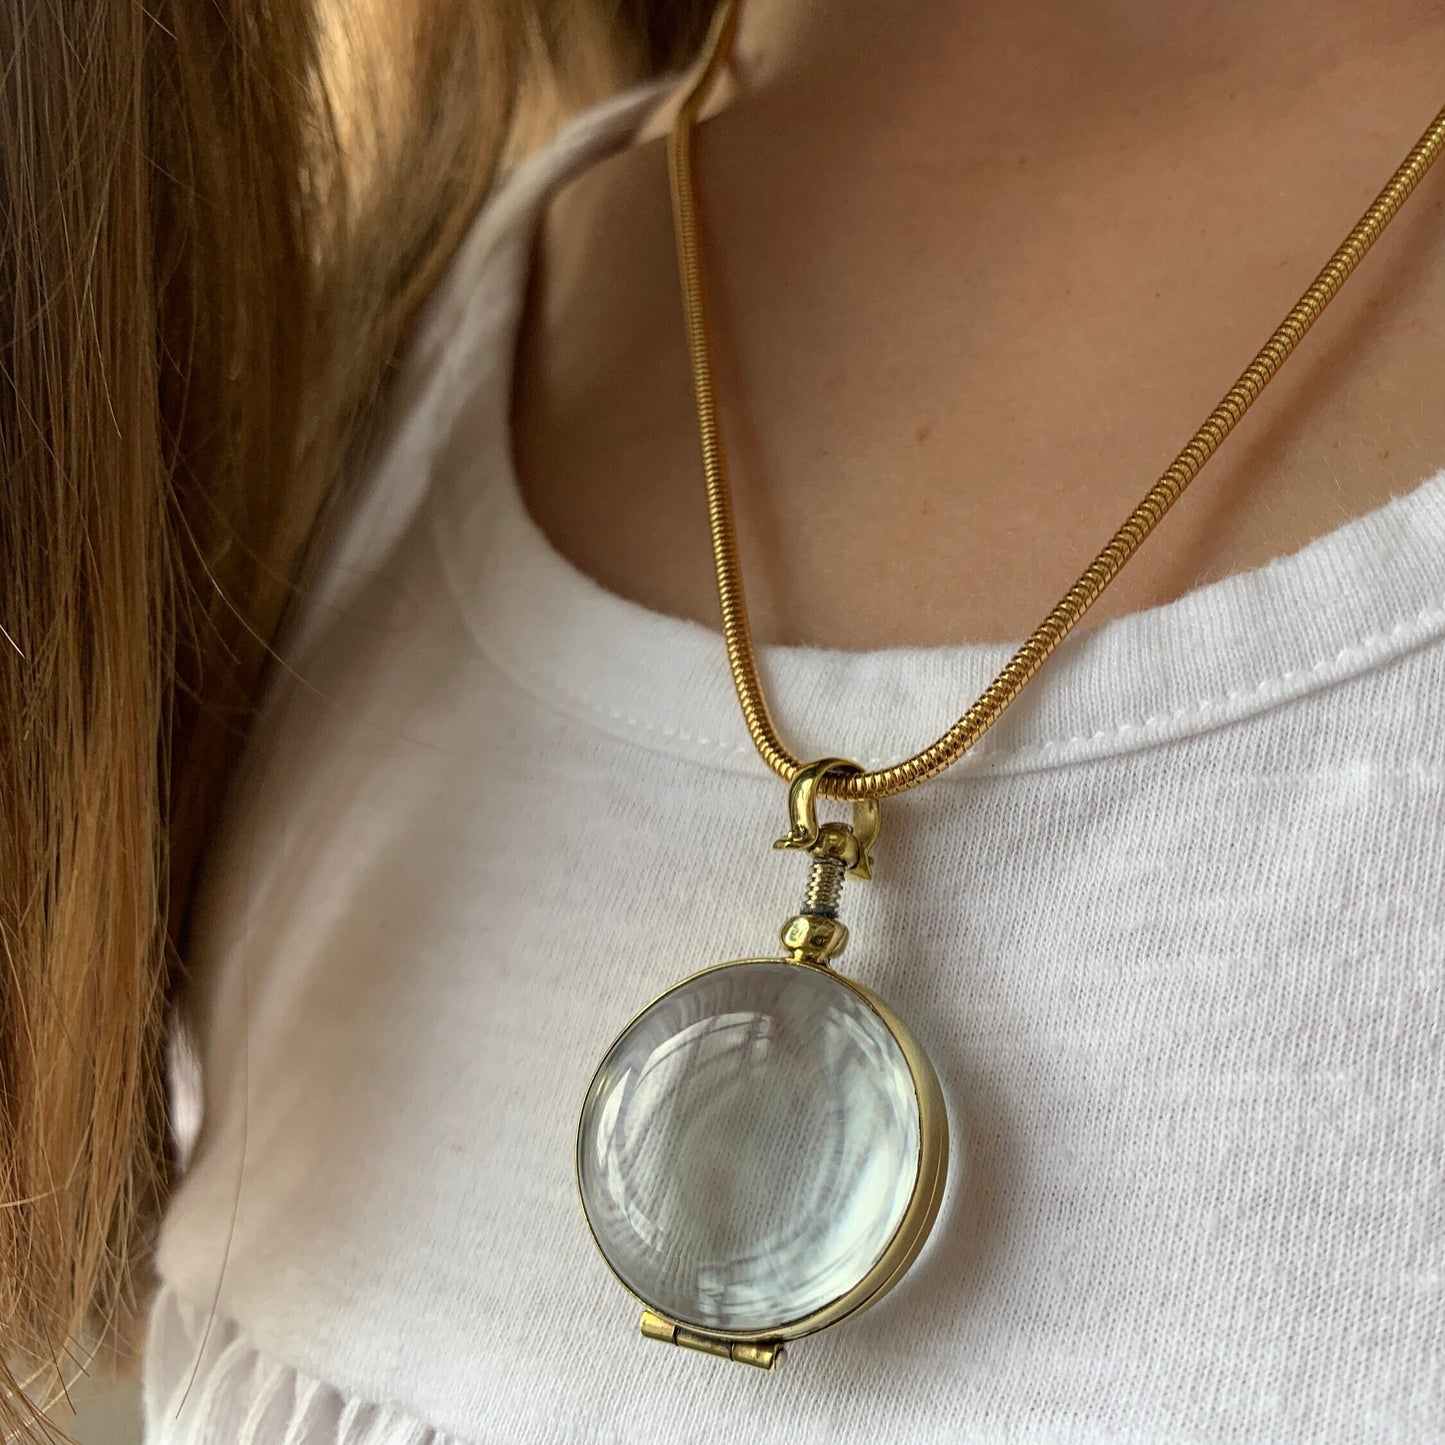 Large budget gold locket necklaces to hold crystals Gemstone Necklace Cheap Birthstone Necklace Choose your Chain, gold locket, gift for her